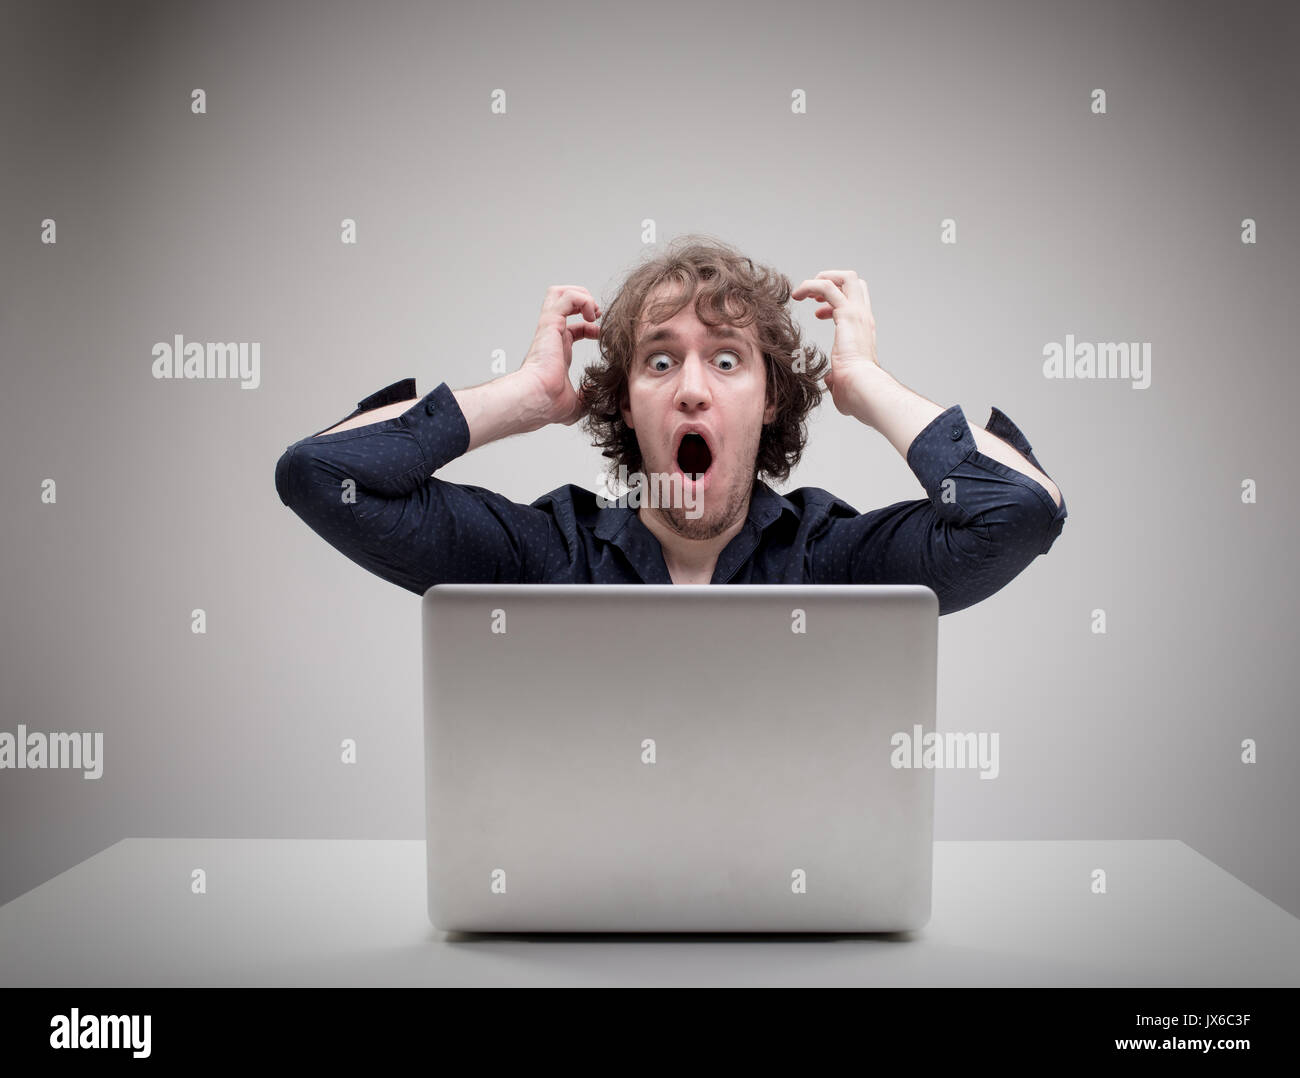 businessman very shocked about something he just viewed or read on the internet or viruses or application problems Stock Photo